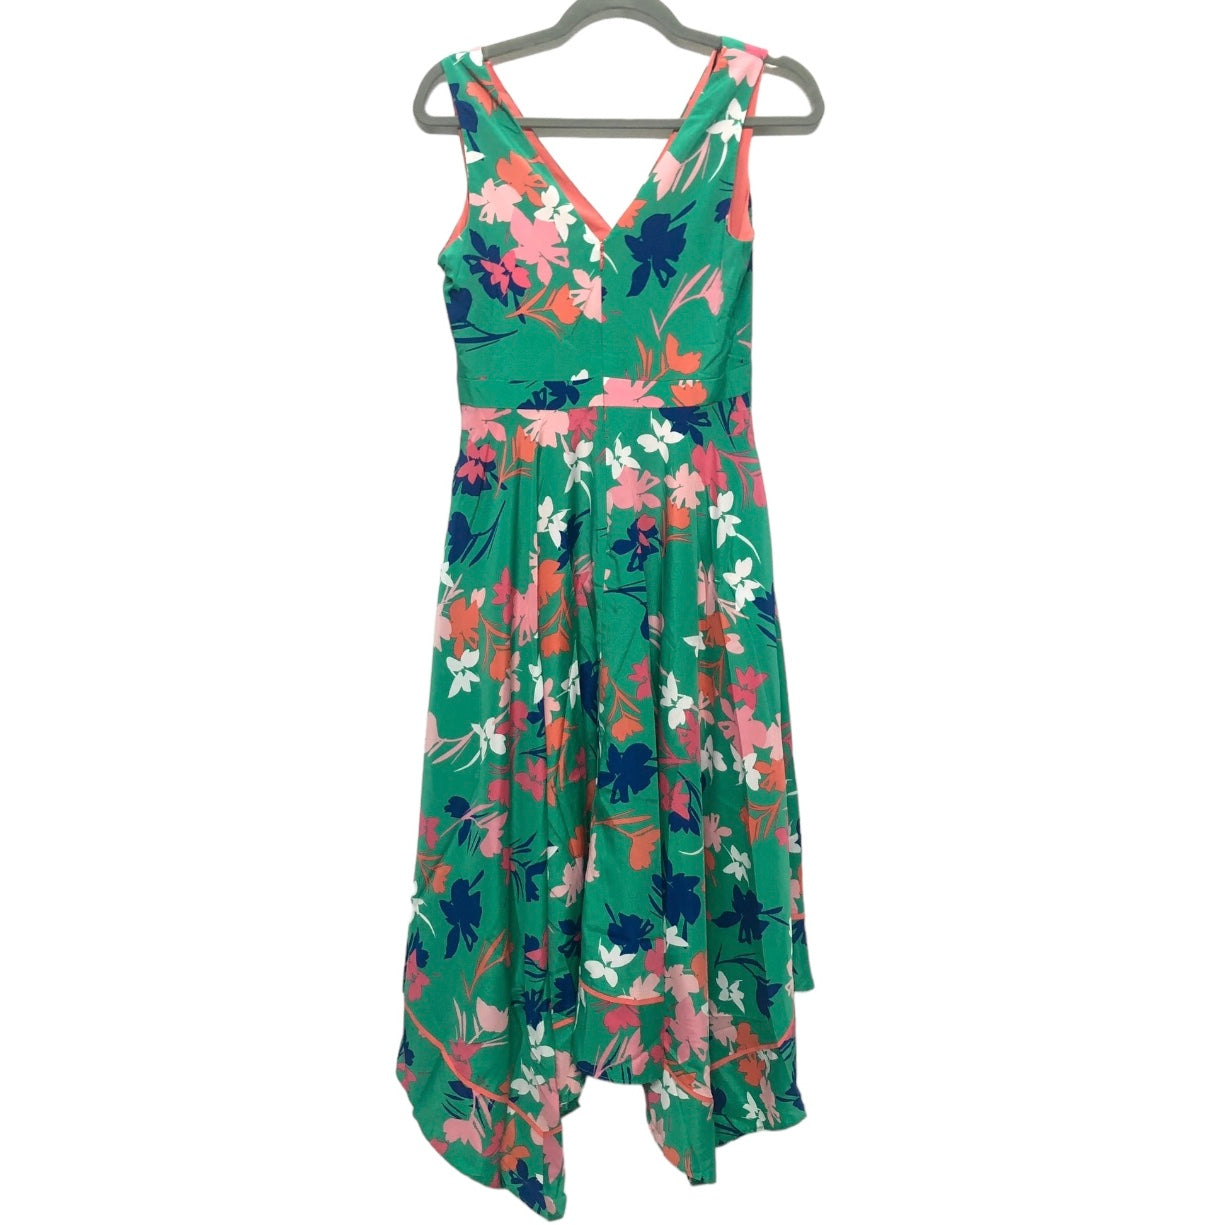 Green & Pink Dress Casual Midi Vince Camuto, Size 2